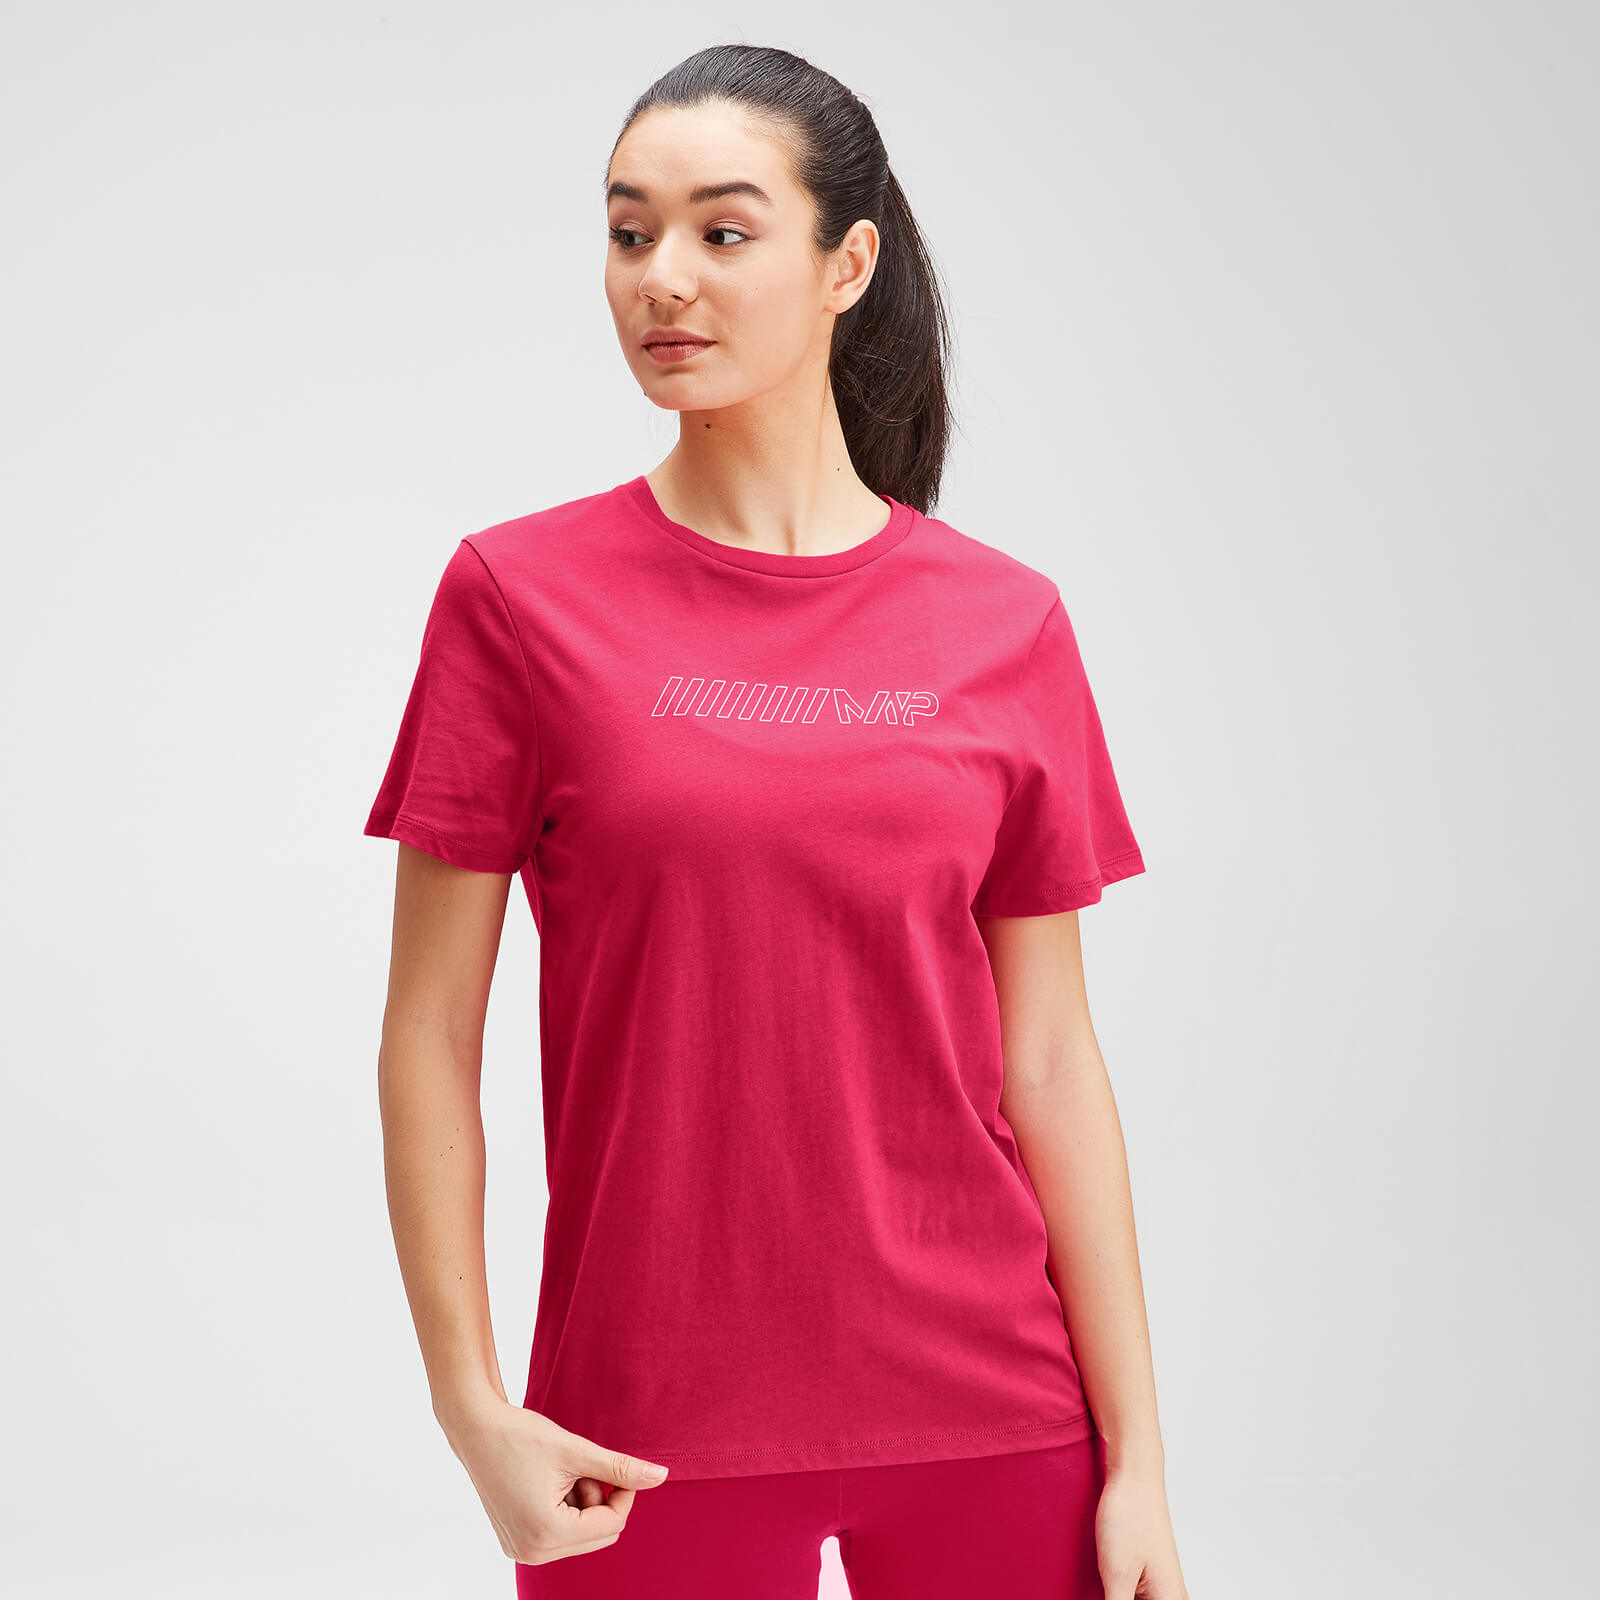 MP Women's Outline Graphic T-Shirt - Virtual Pink - XS